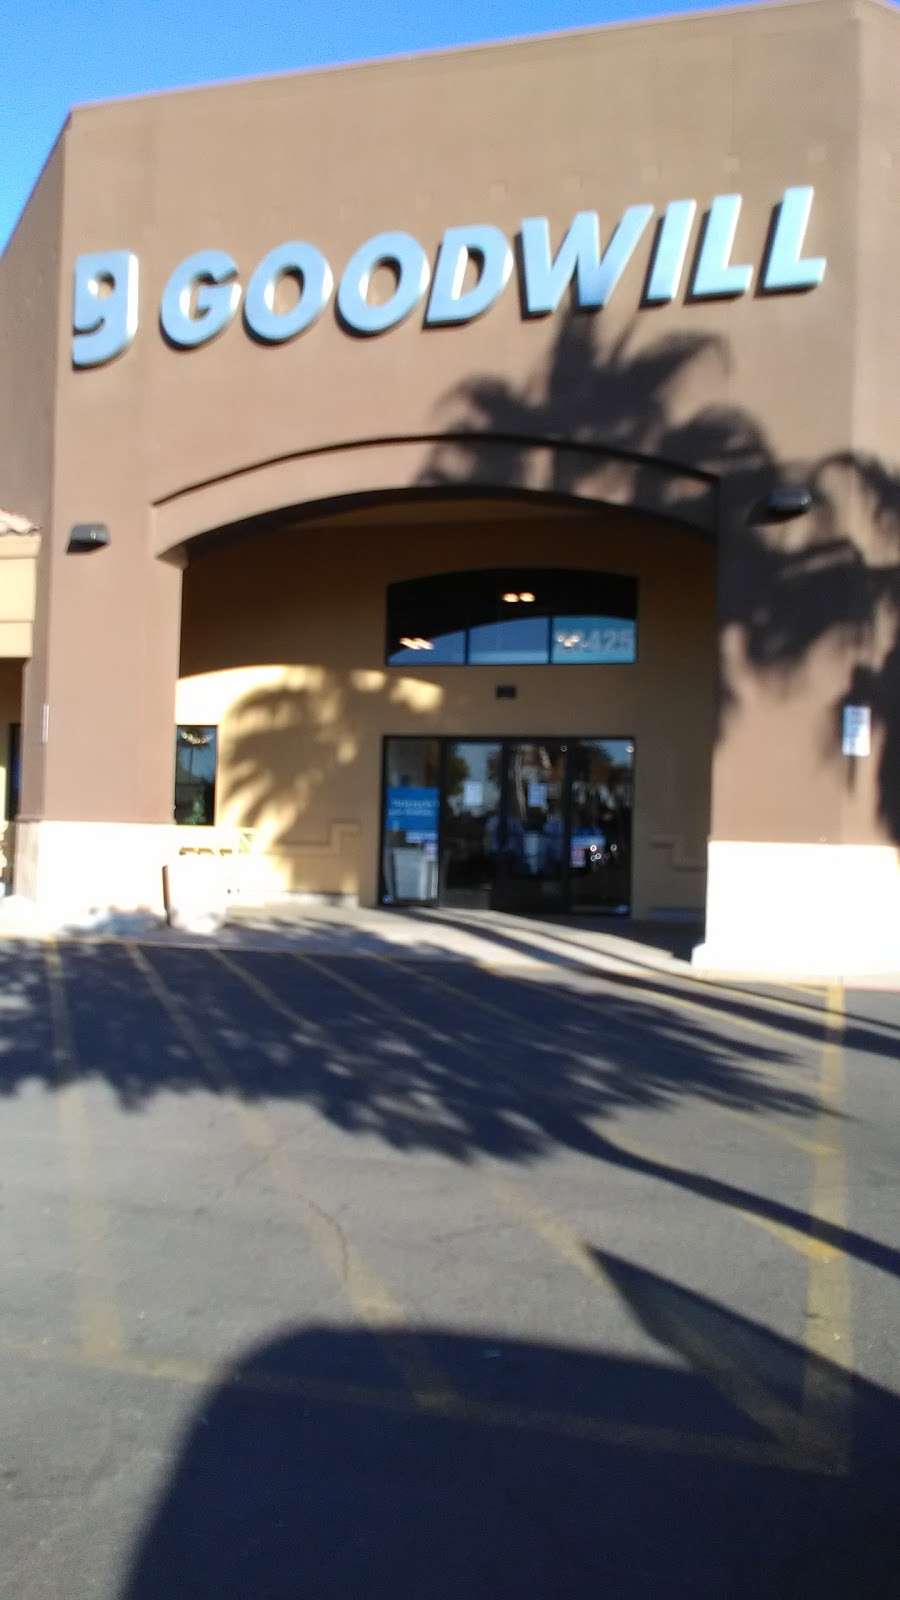 Pinnacle Peak - Goodwill - Retail Store and Donation Center | 23425 N 39th Dr #101, Glendale, AZ 85310, USA | Phone: (602) 216-3904